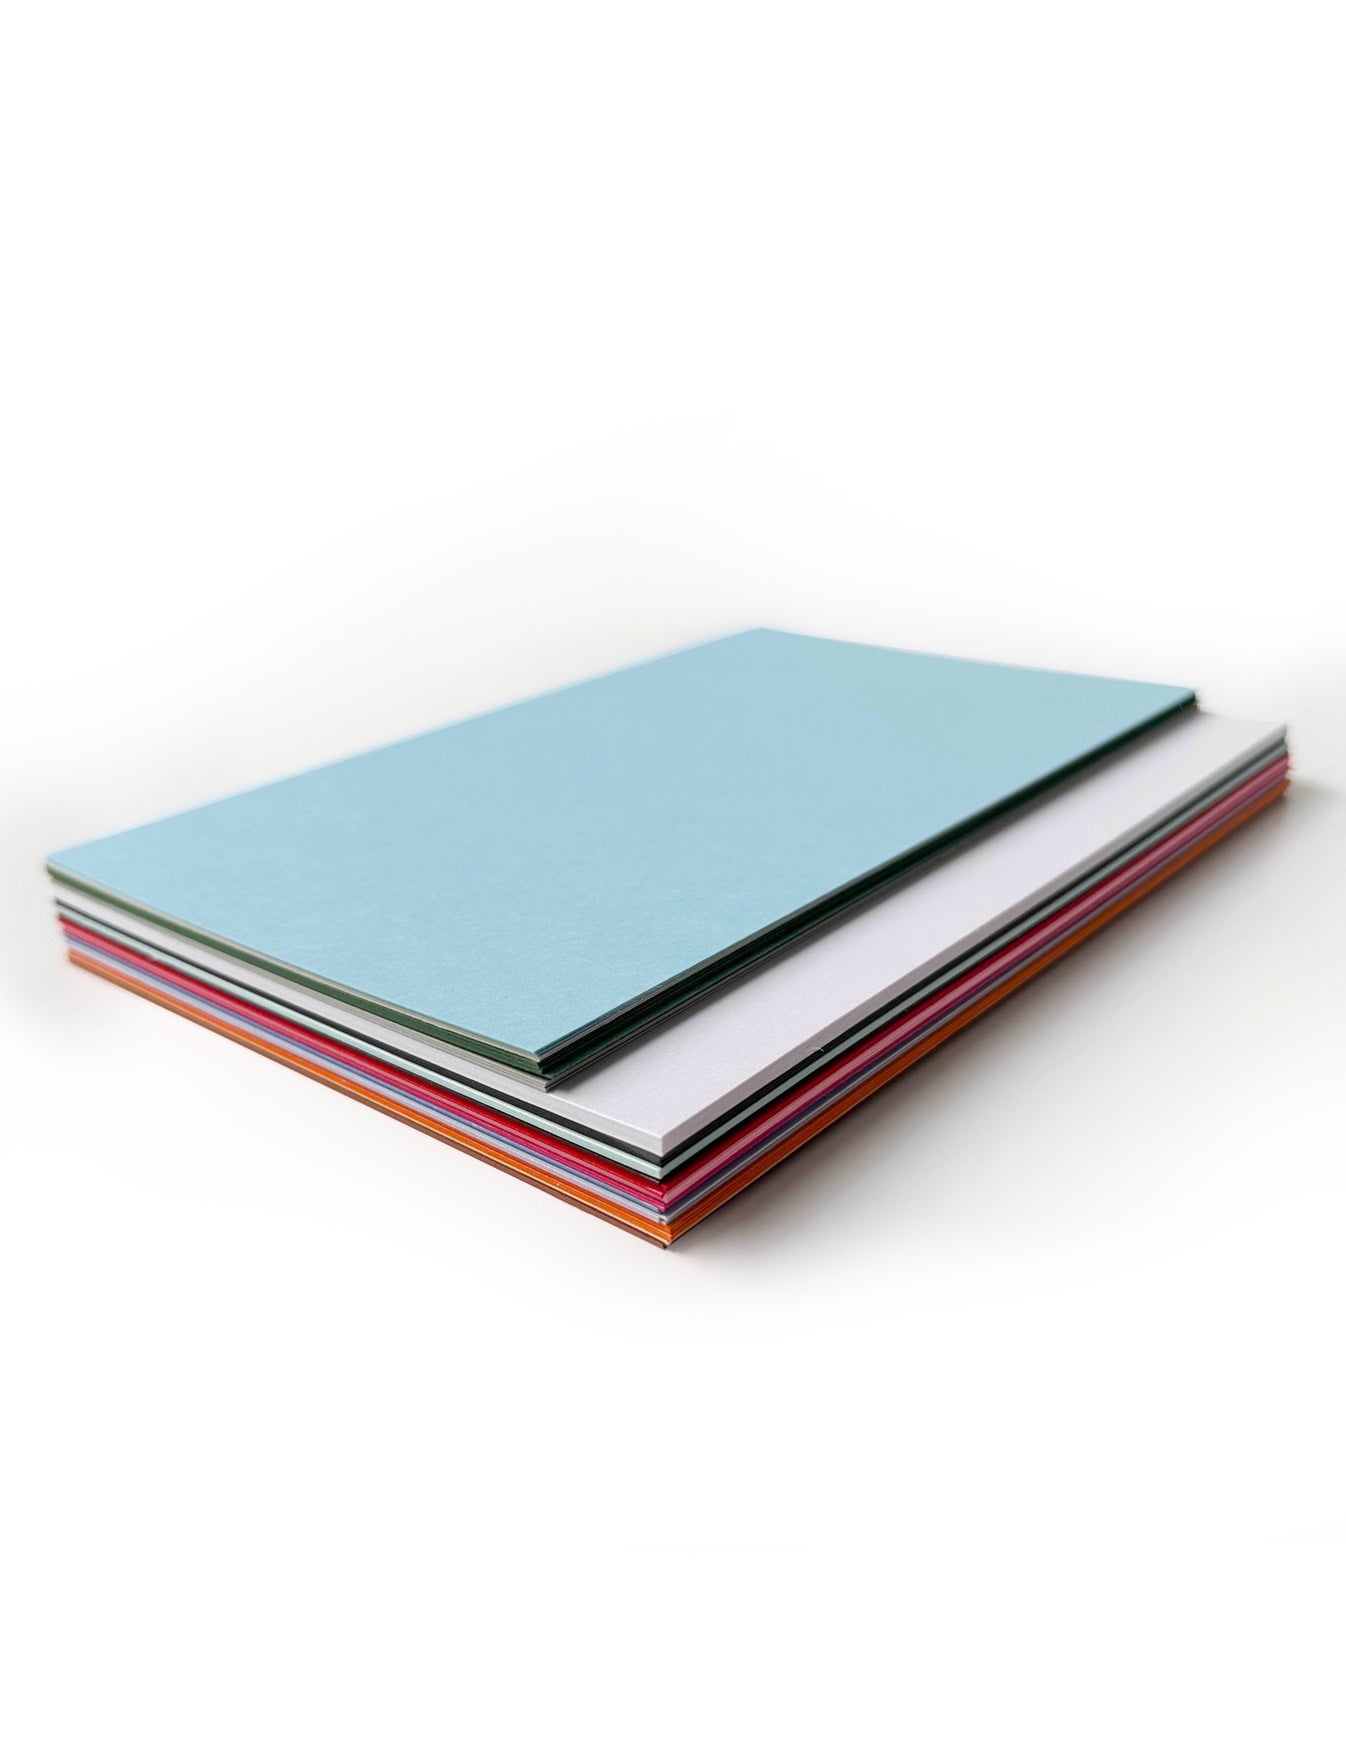 50 Sheets A4 Thick Colorful Cardstock Paper For Diy Crafts, Business Cards,  Photo Albums, Children'S Art Projects